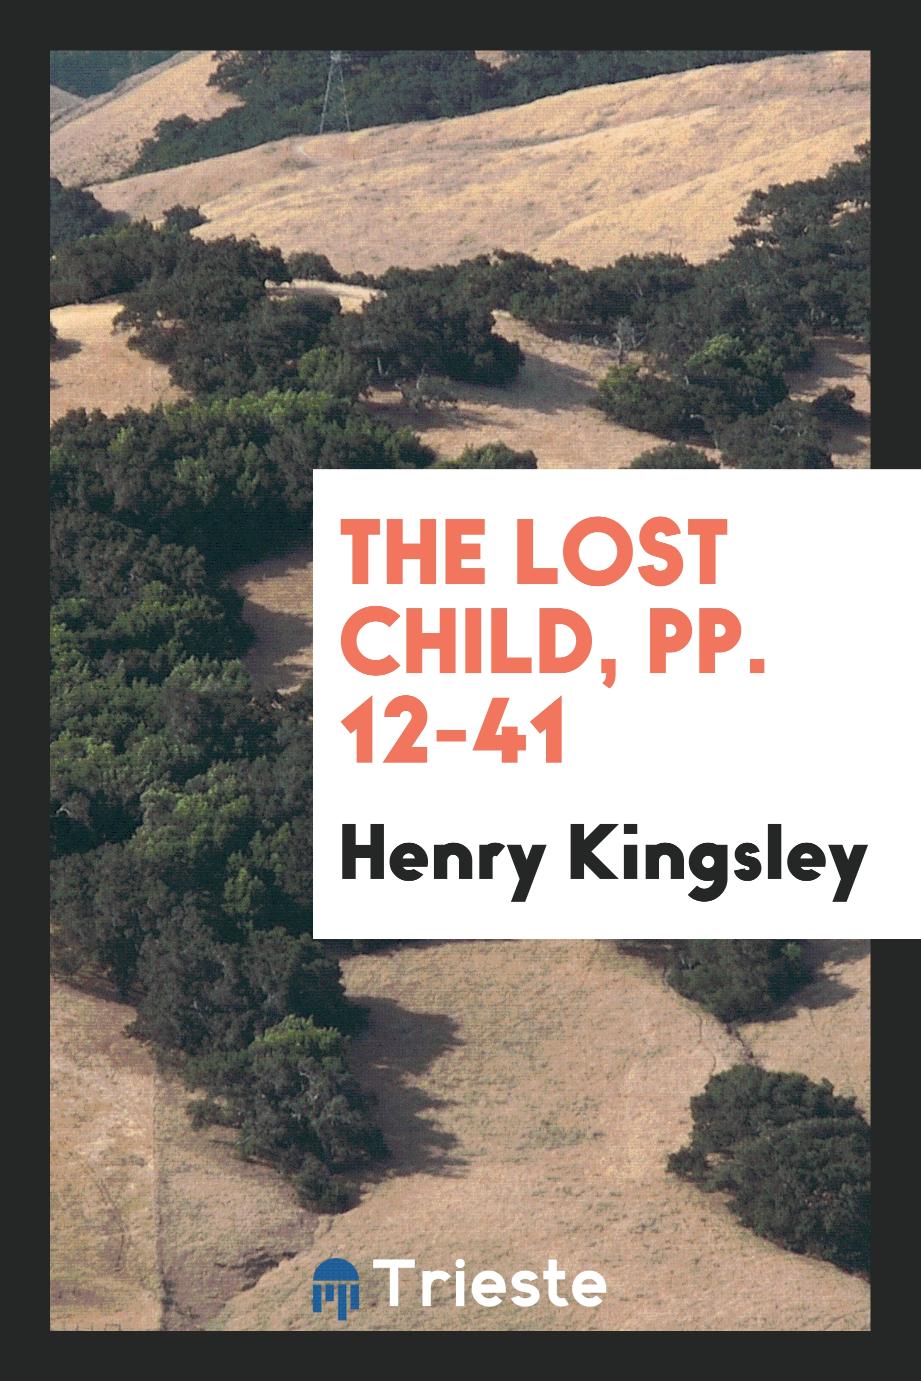 The lost child, pp. 12-41